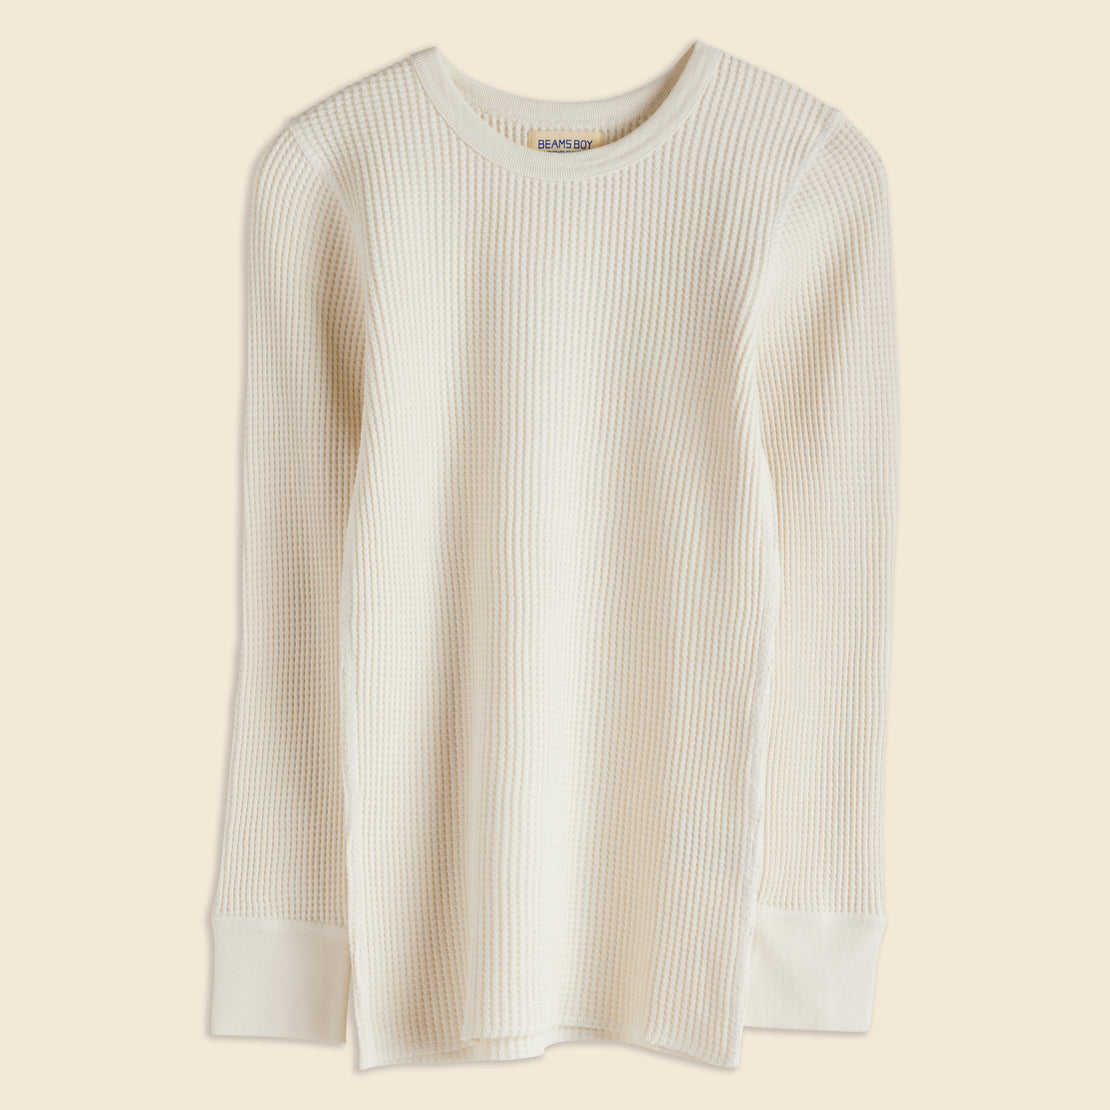 BEAMS BOY Long Sleeve Thermal Pullover - White